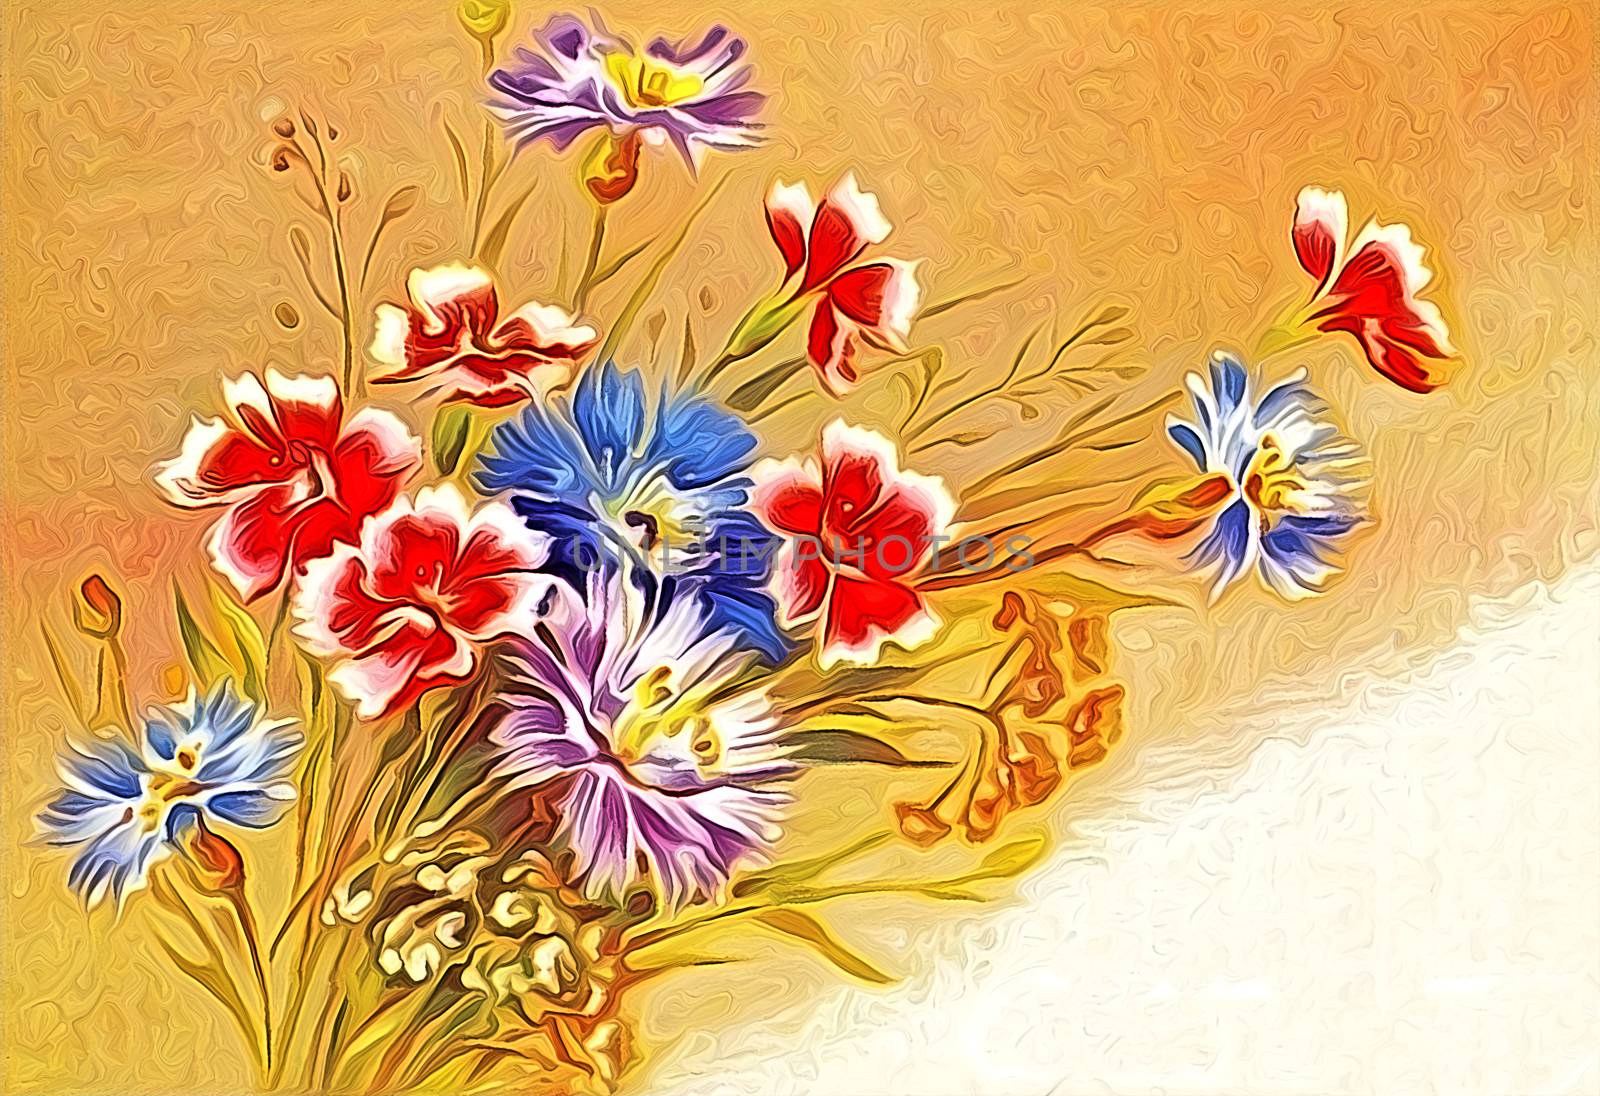 Oil Painting of the beautiful flowers by bormash